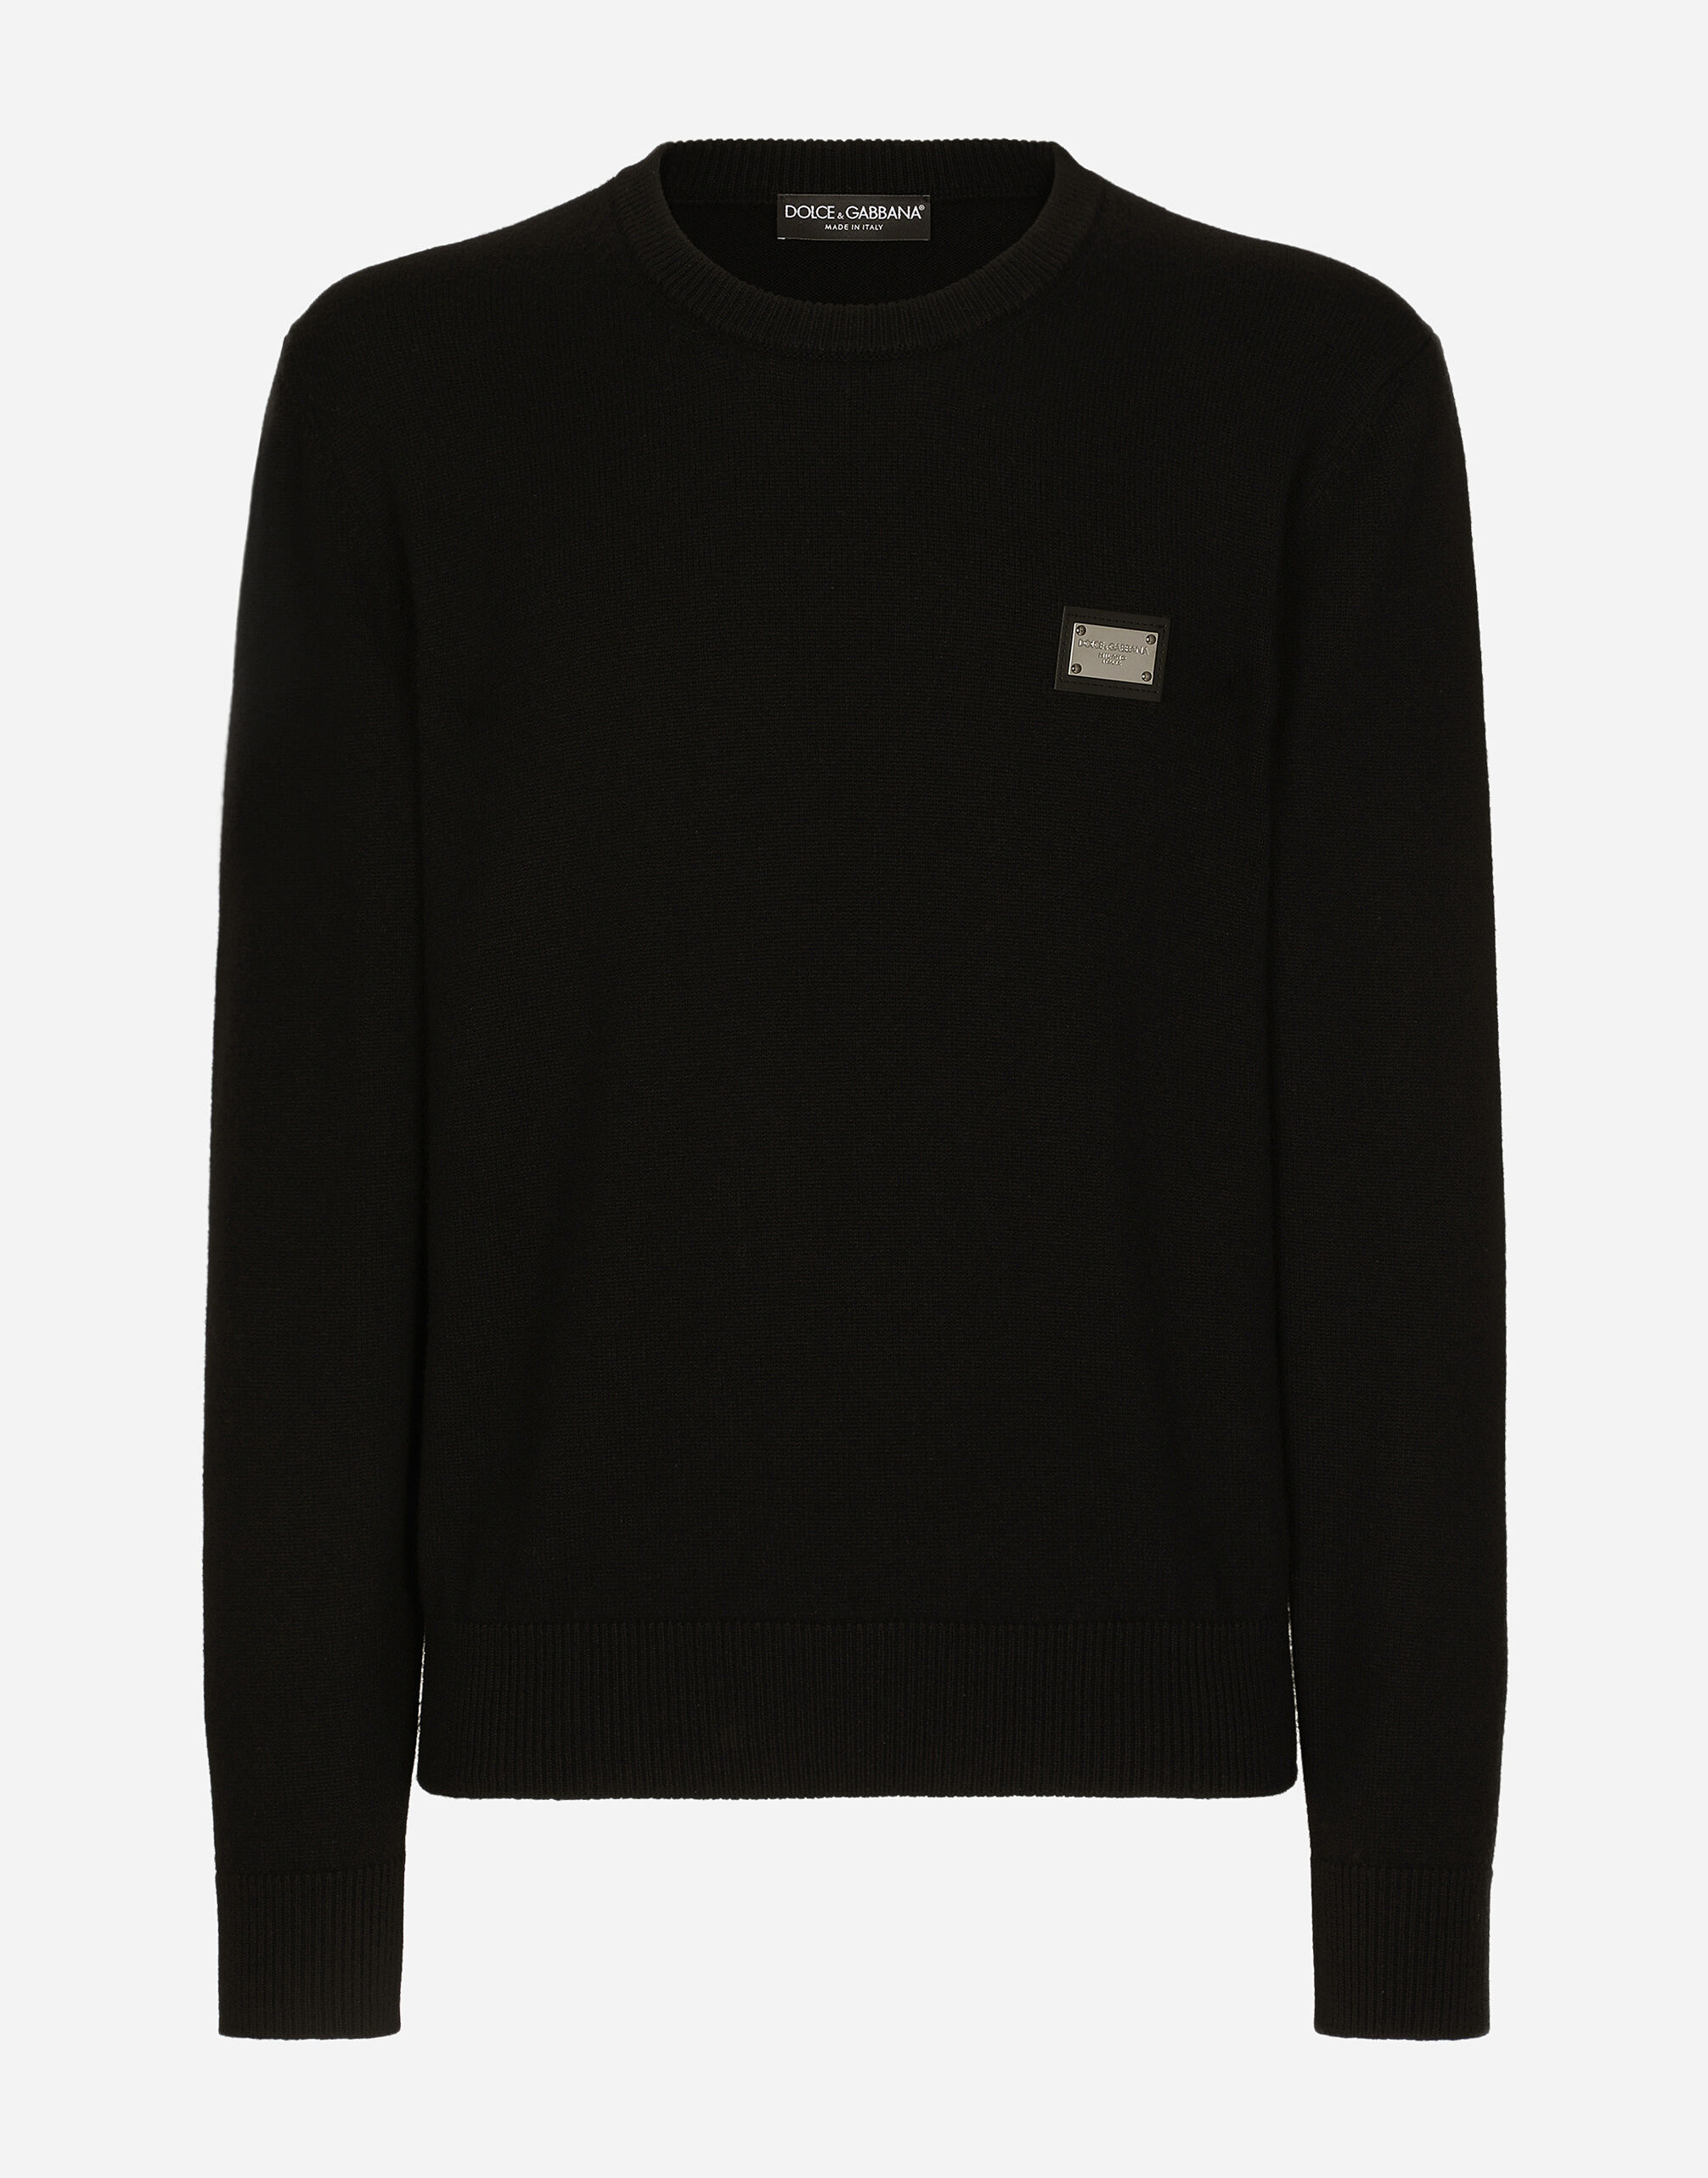 Dolce & Gabbana Wool round-neck sweater with branded tag Black GXO39TJEMQ4